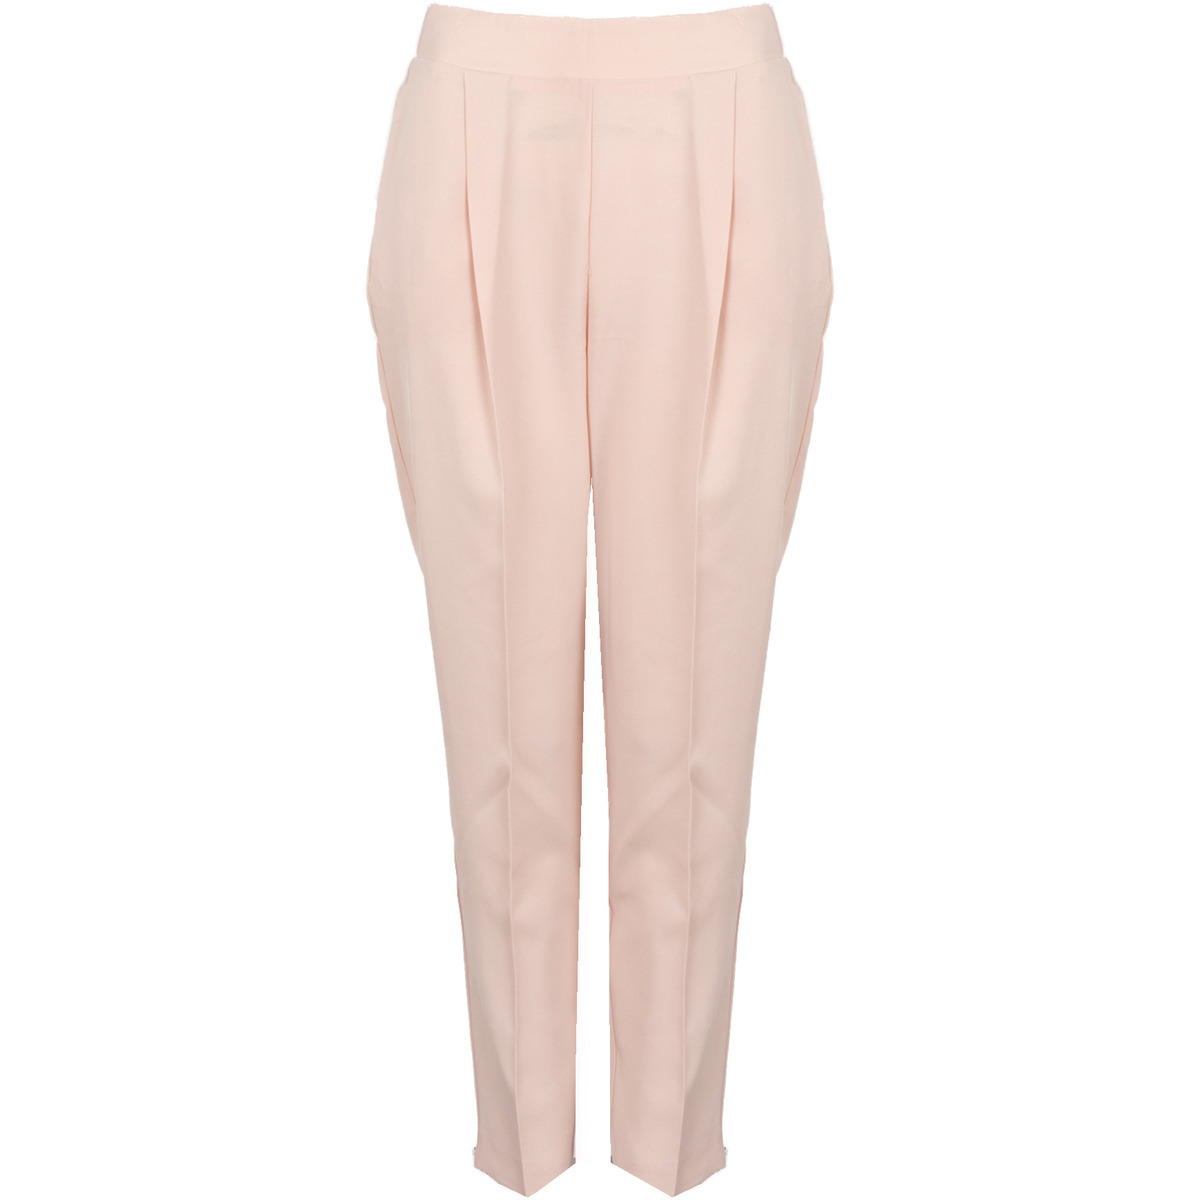 Silvian Heach Lady Trousers Pink at Spartoo GOOFASH